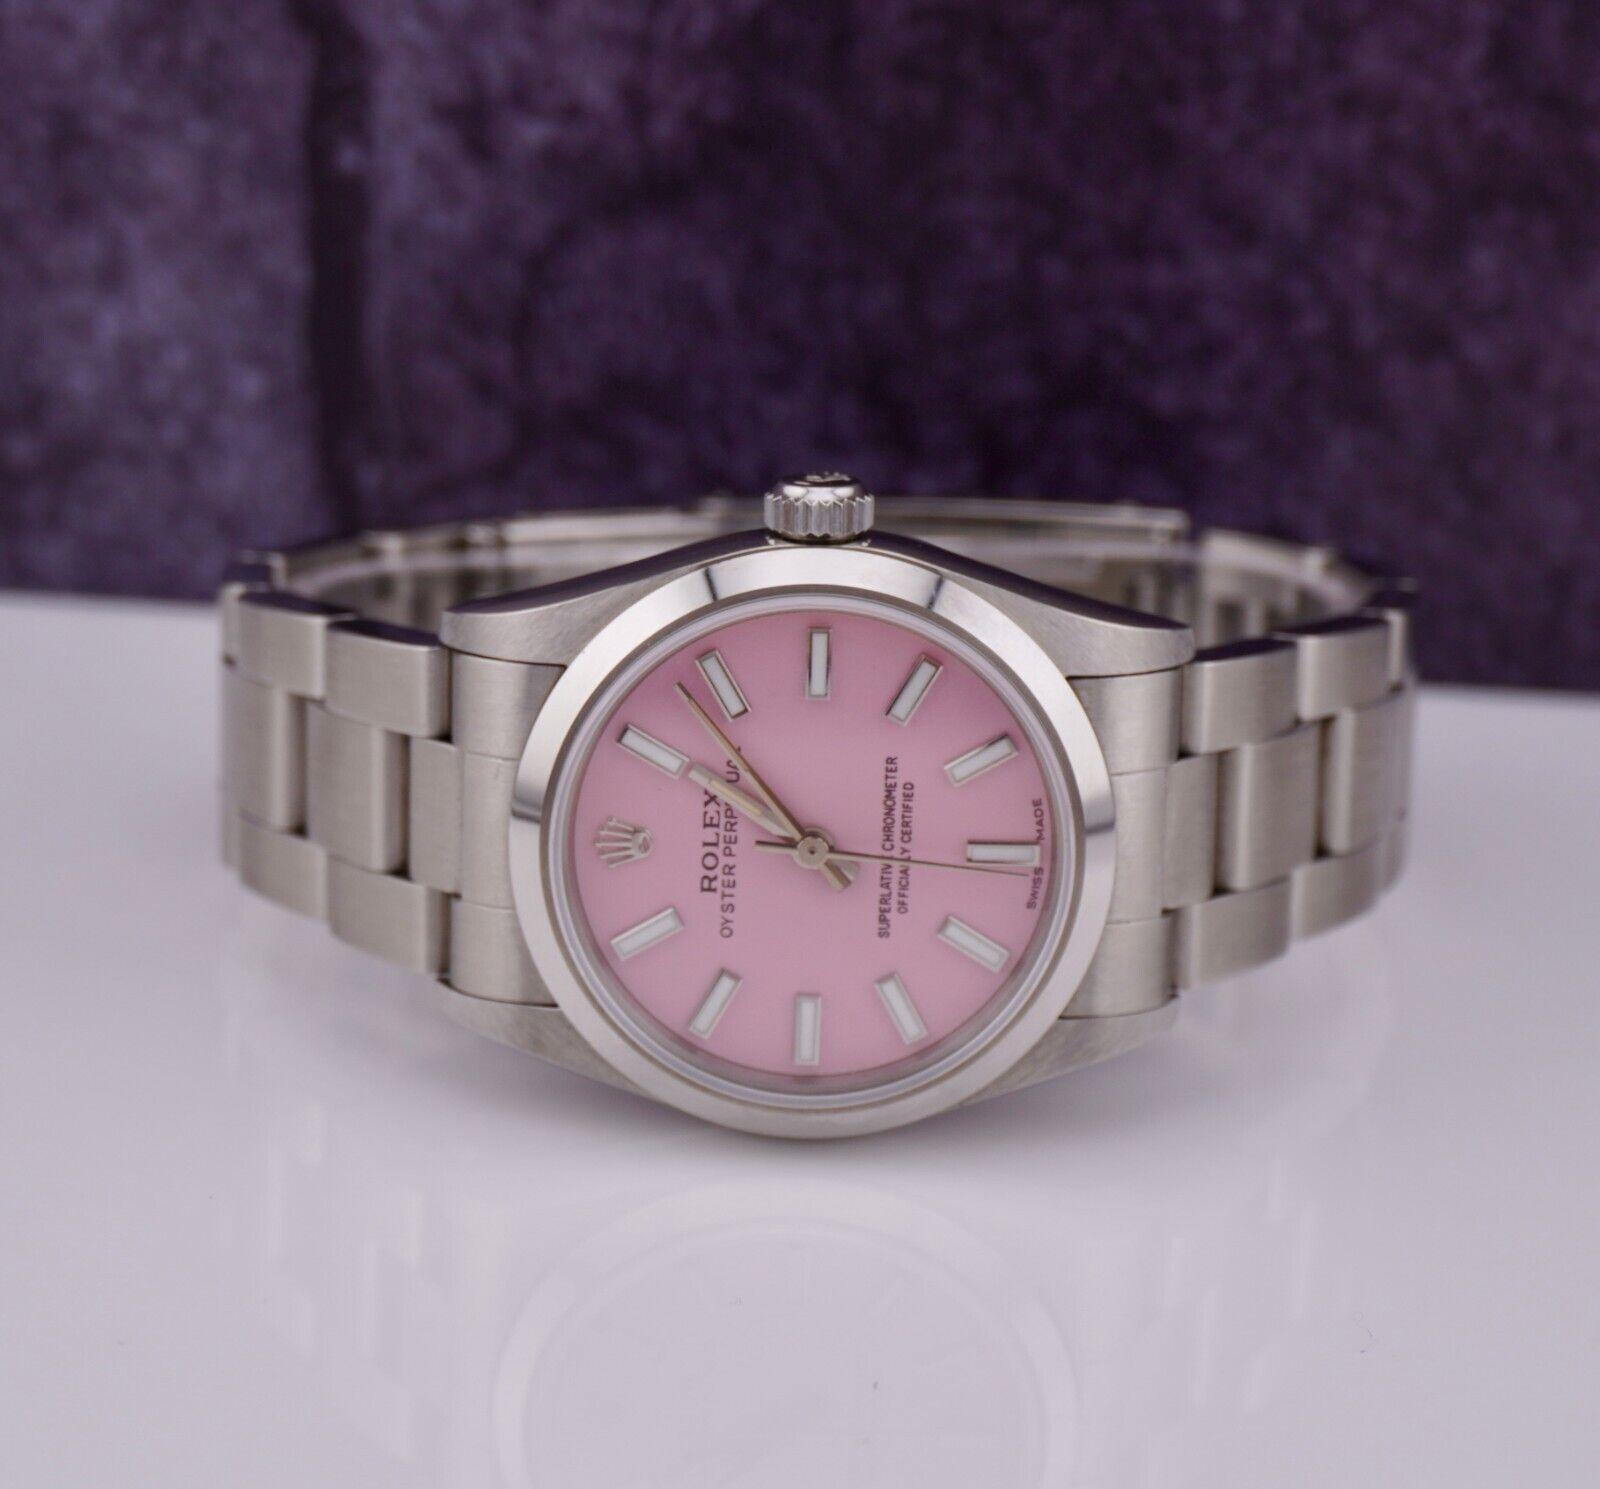 Rolex Oyster Perpetual 31mm Watch

Pre-owned W/Gift Box 
100% Authentic Authenticity Card
Condition - (Great Condition) - See Pics
Watch Reference - 77080
Model - Oyster Perpetual 
Dial Color - Pink
Material - Stainless Steel
Watch Will Fit Wrist